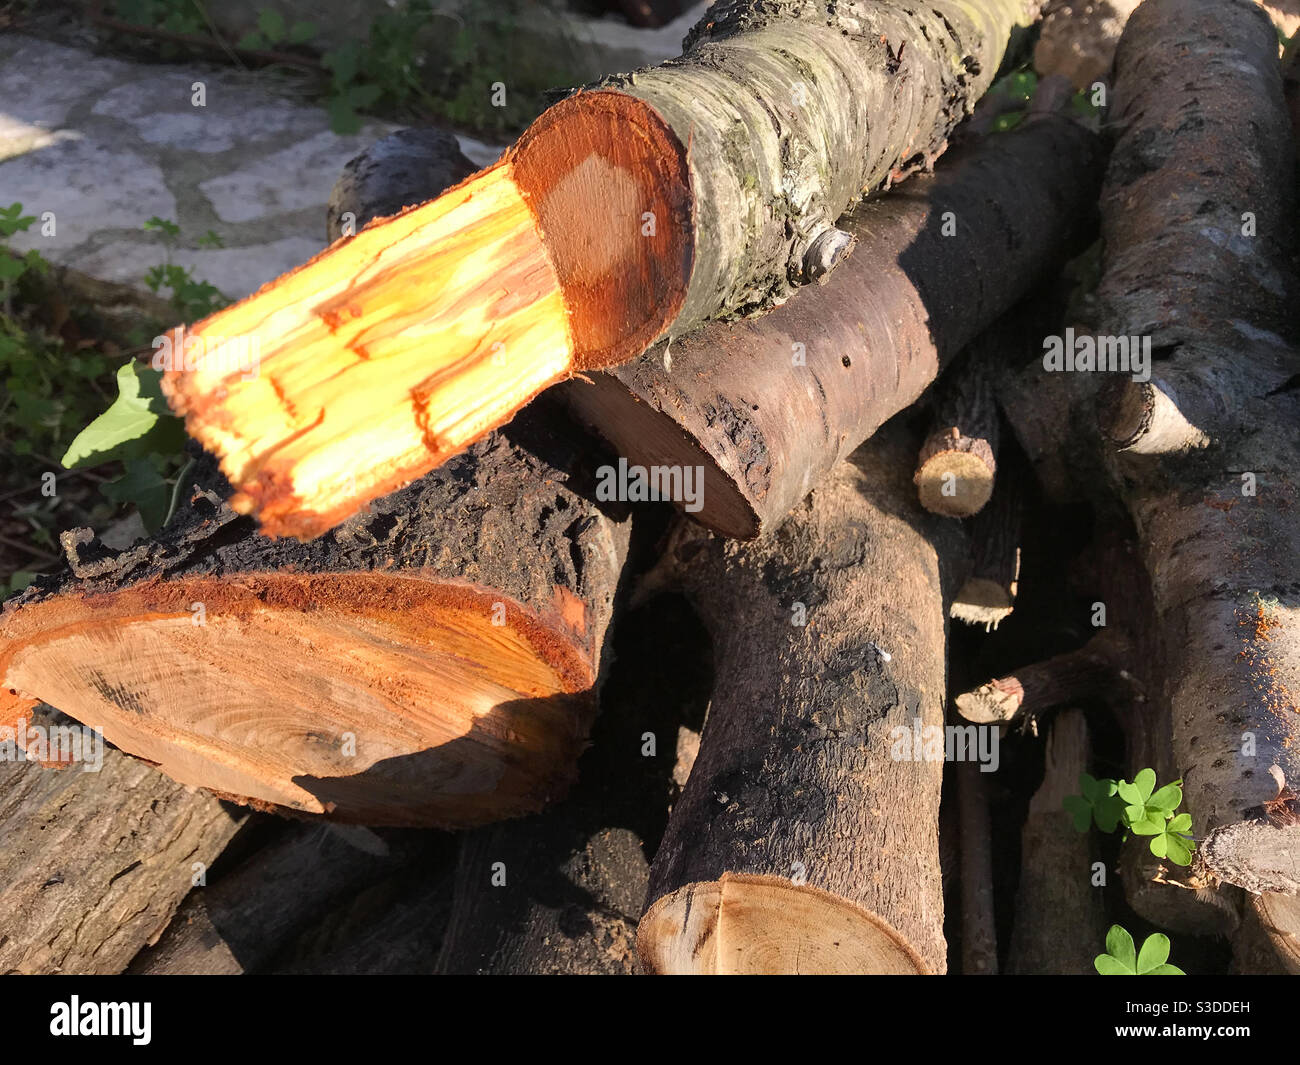 Logs in wood pile Stock Photo